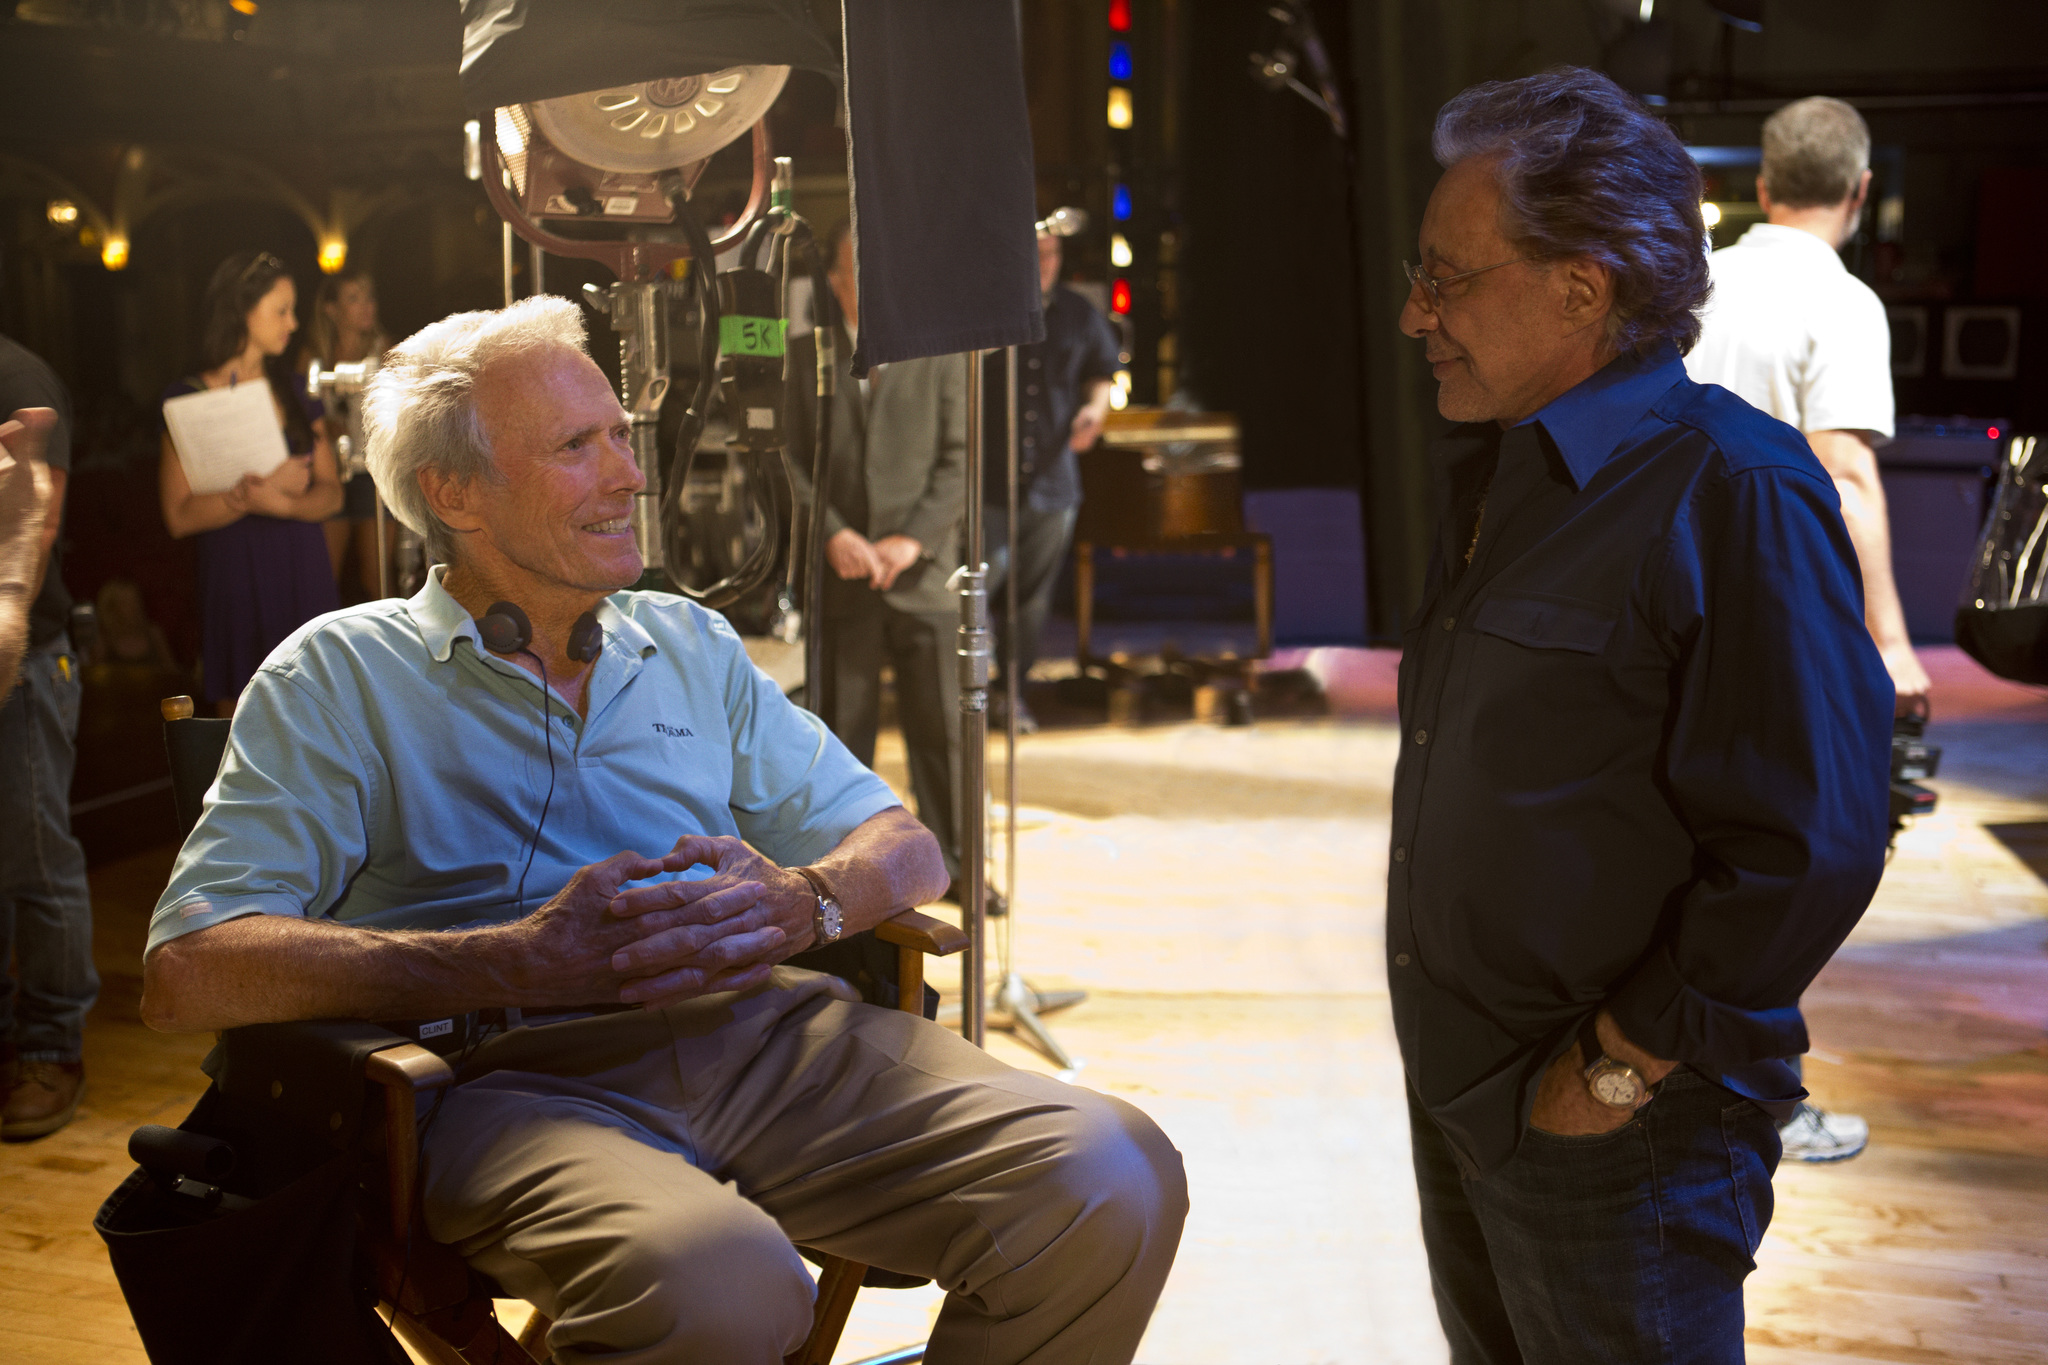 Clint Eastwood and Frankie Valli in Ketveriuke is Dzersio (2014)